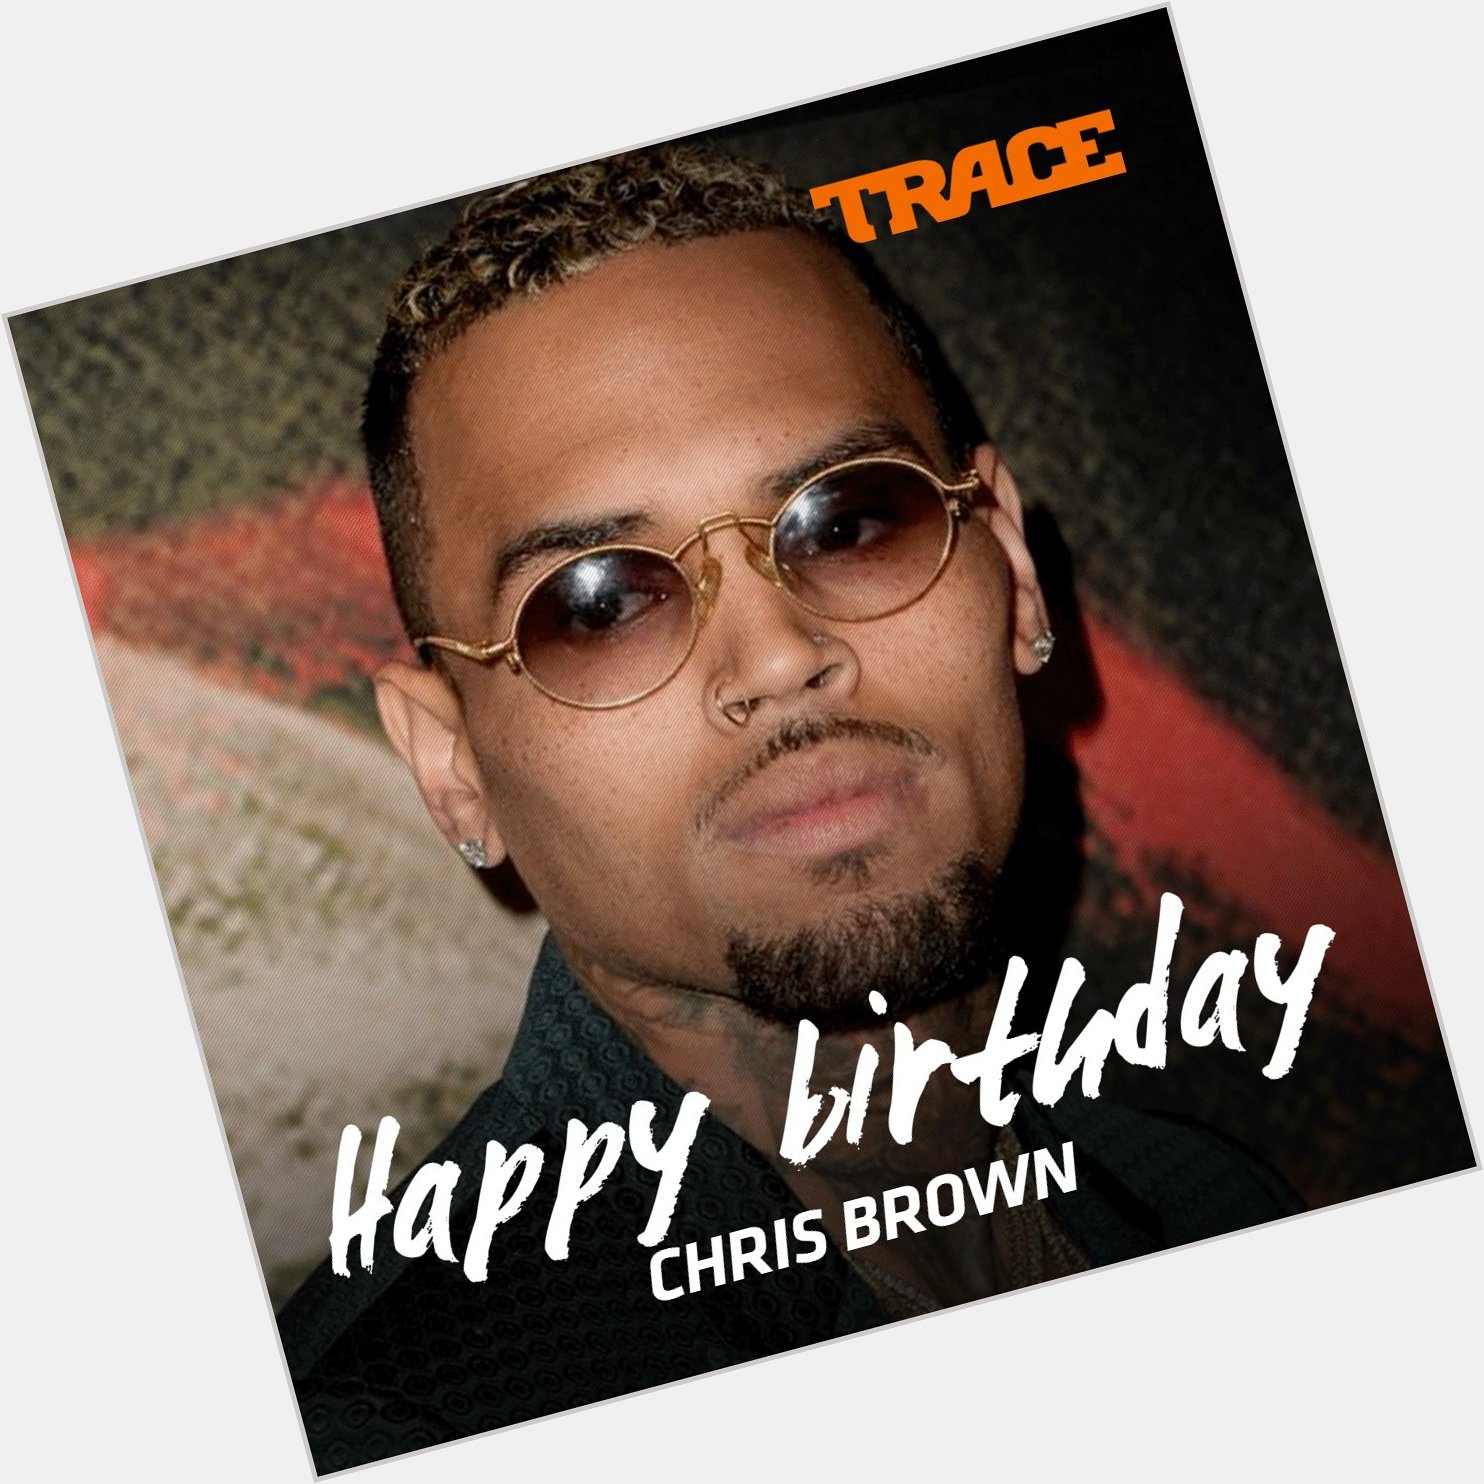 Mr Breezzy Happy Birthday  Chris Brown! Make sure to check his Focus playing at 3pm CAT.  